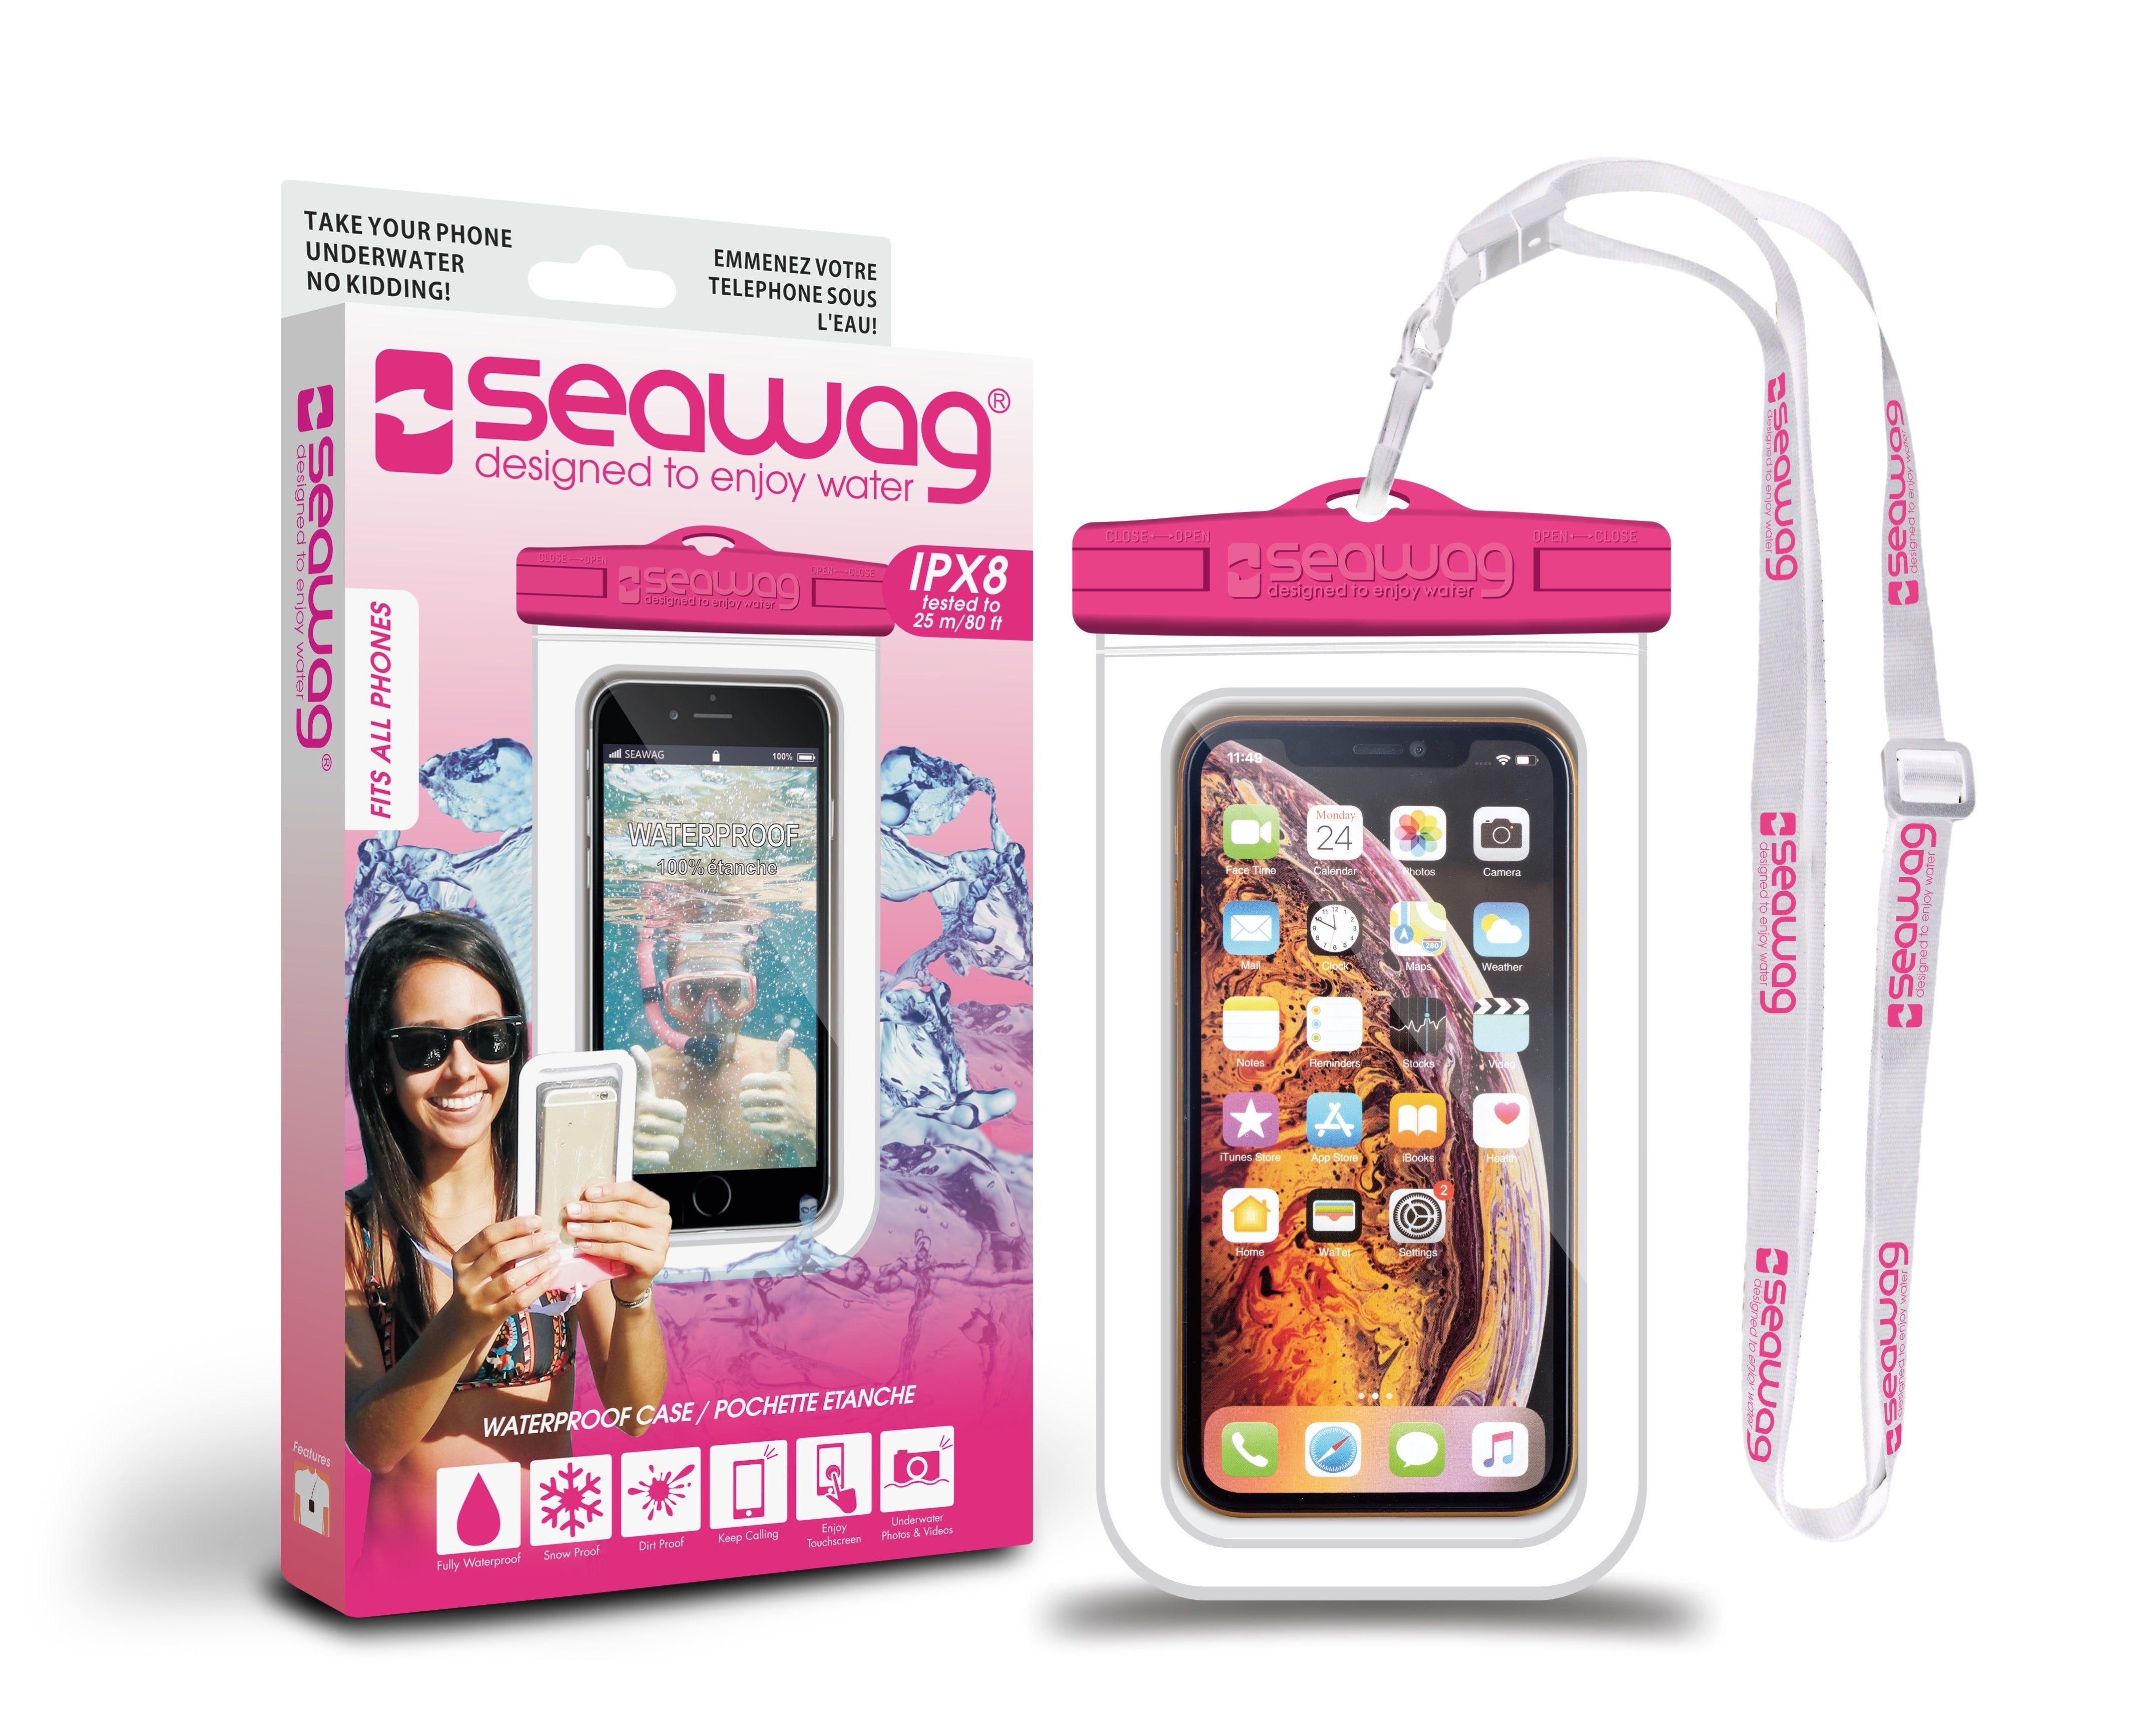 Universal Waterproof Case For Smartphone - White/Pink